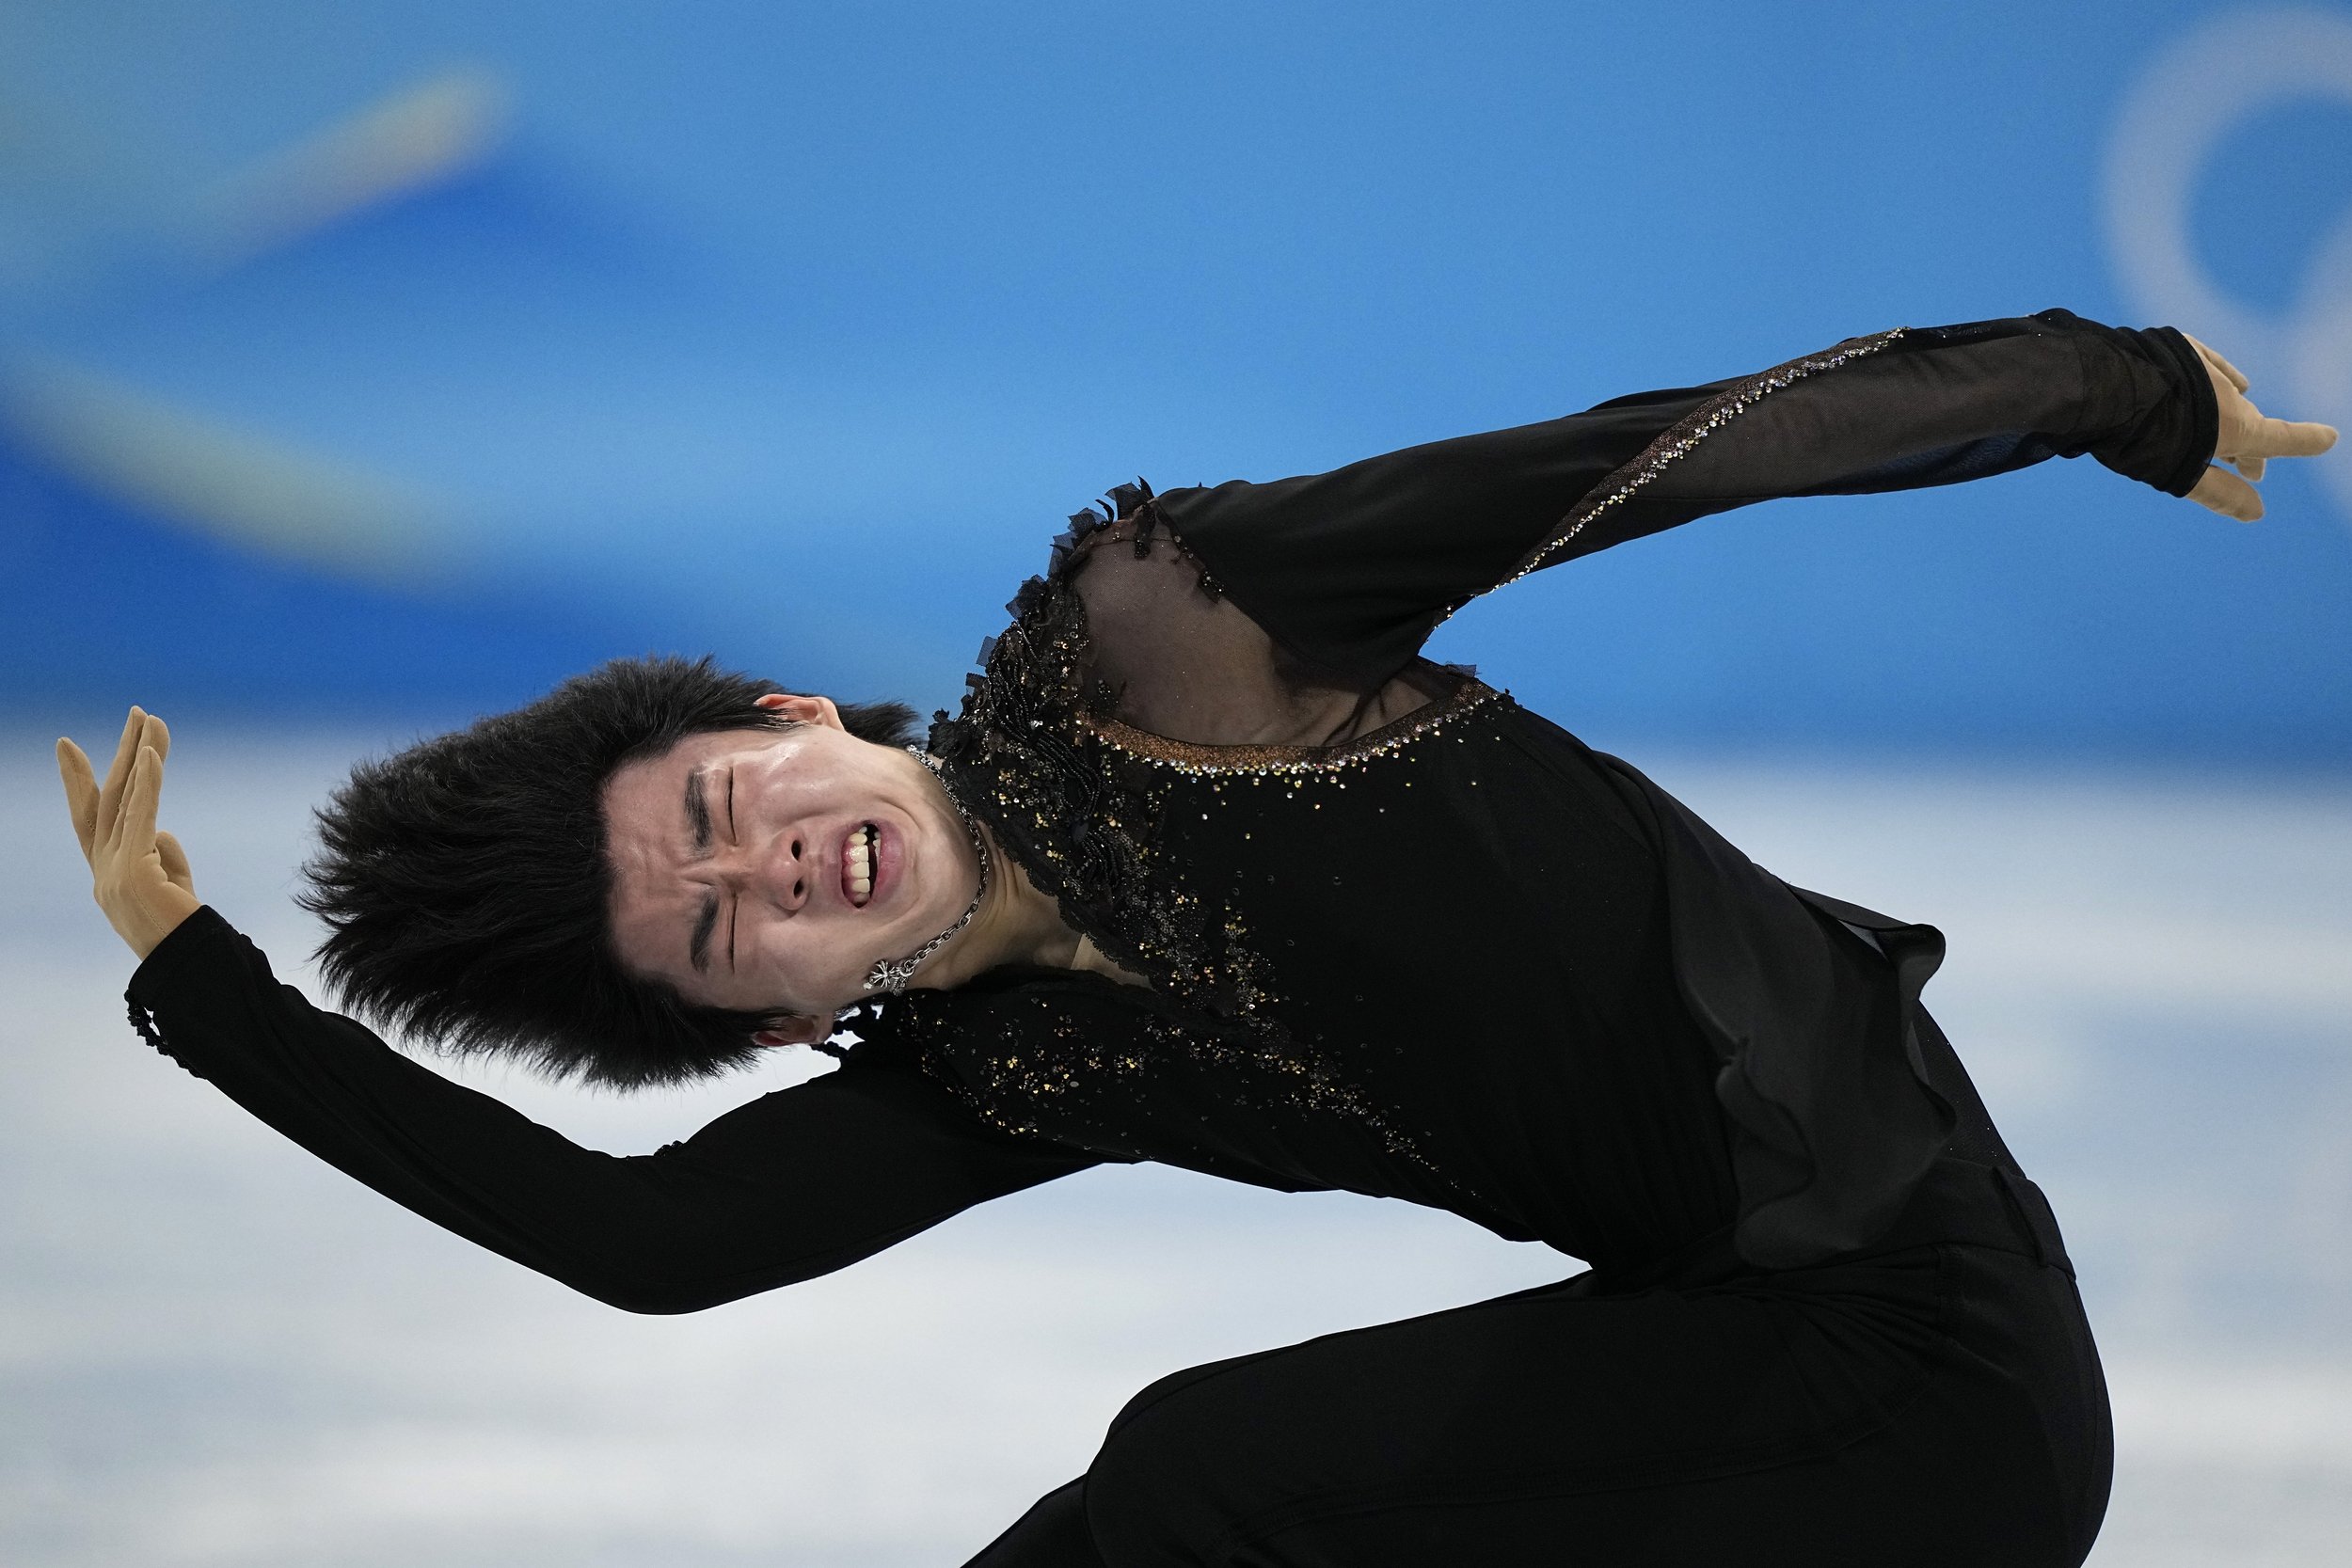  Cha Junhwan, of South Korea, competes during the men's short program figure skating competition at the 2022 Winter Olympics, Tuesday, Feb. 8, 2022, in Beijing. (AP Photo/David J. Phillip) 